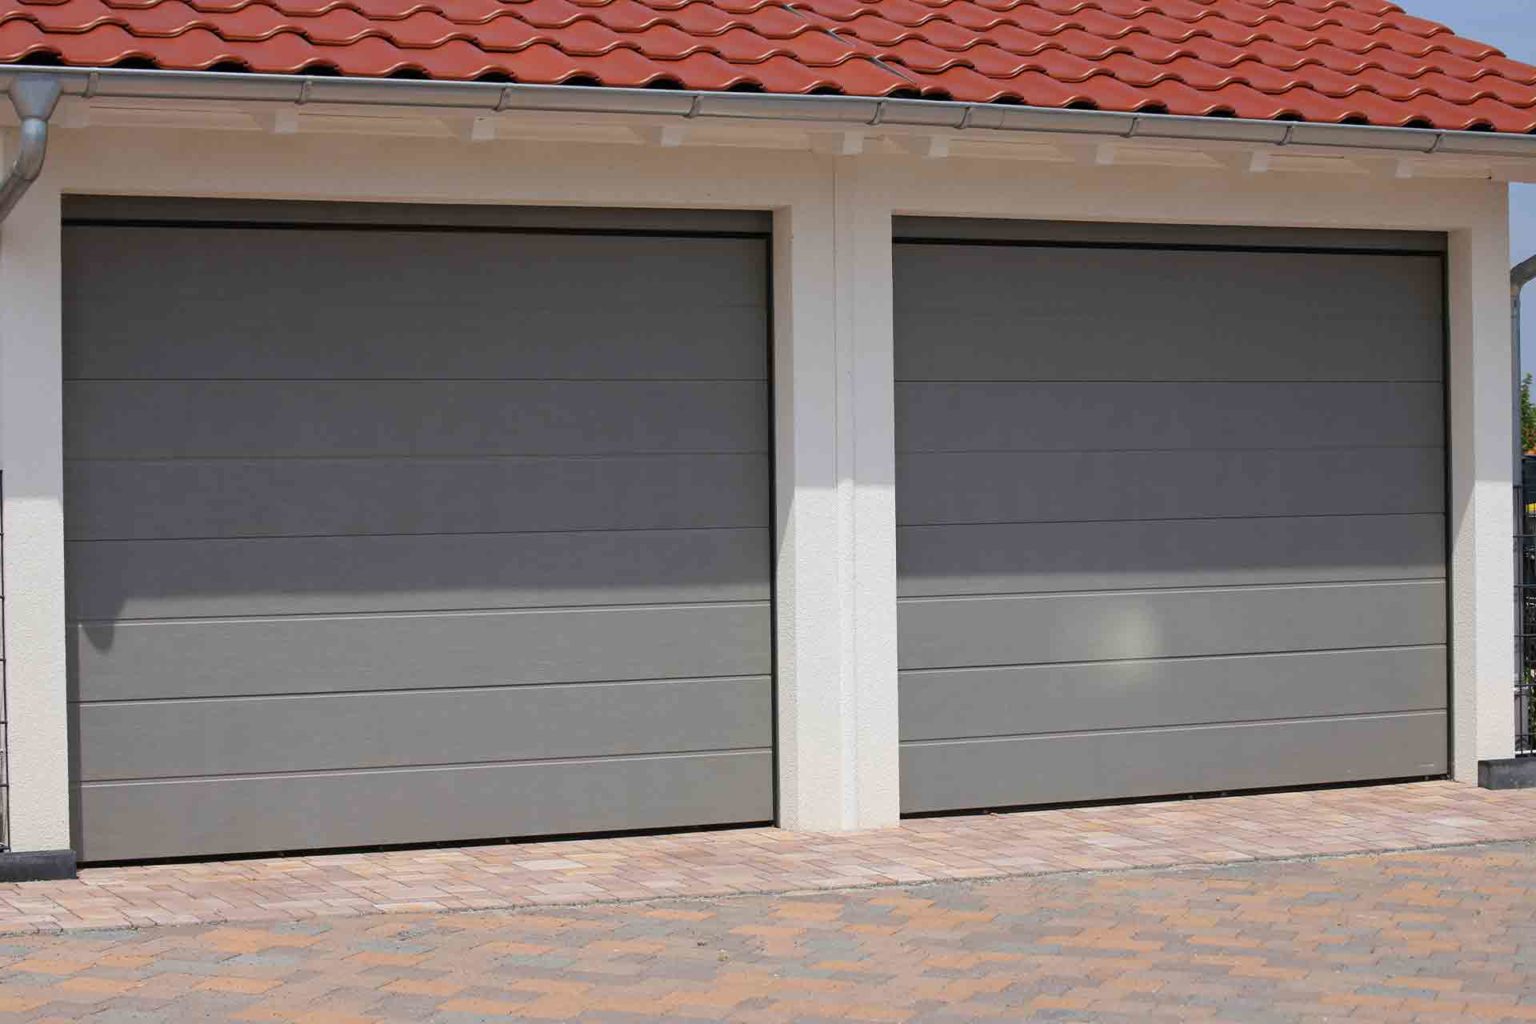 Finding A High-Quality Garage Door Replacement